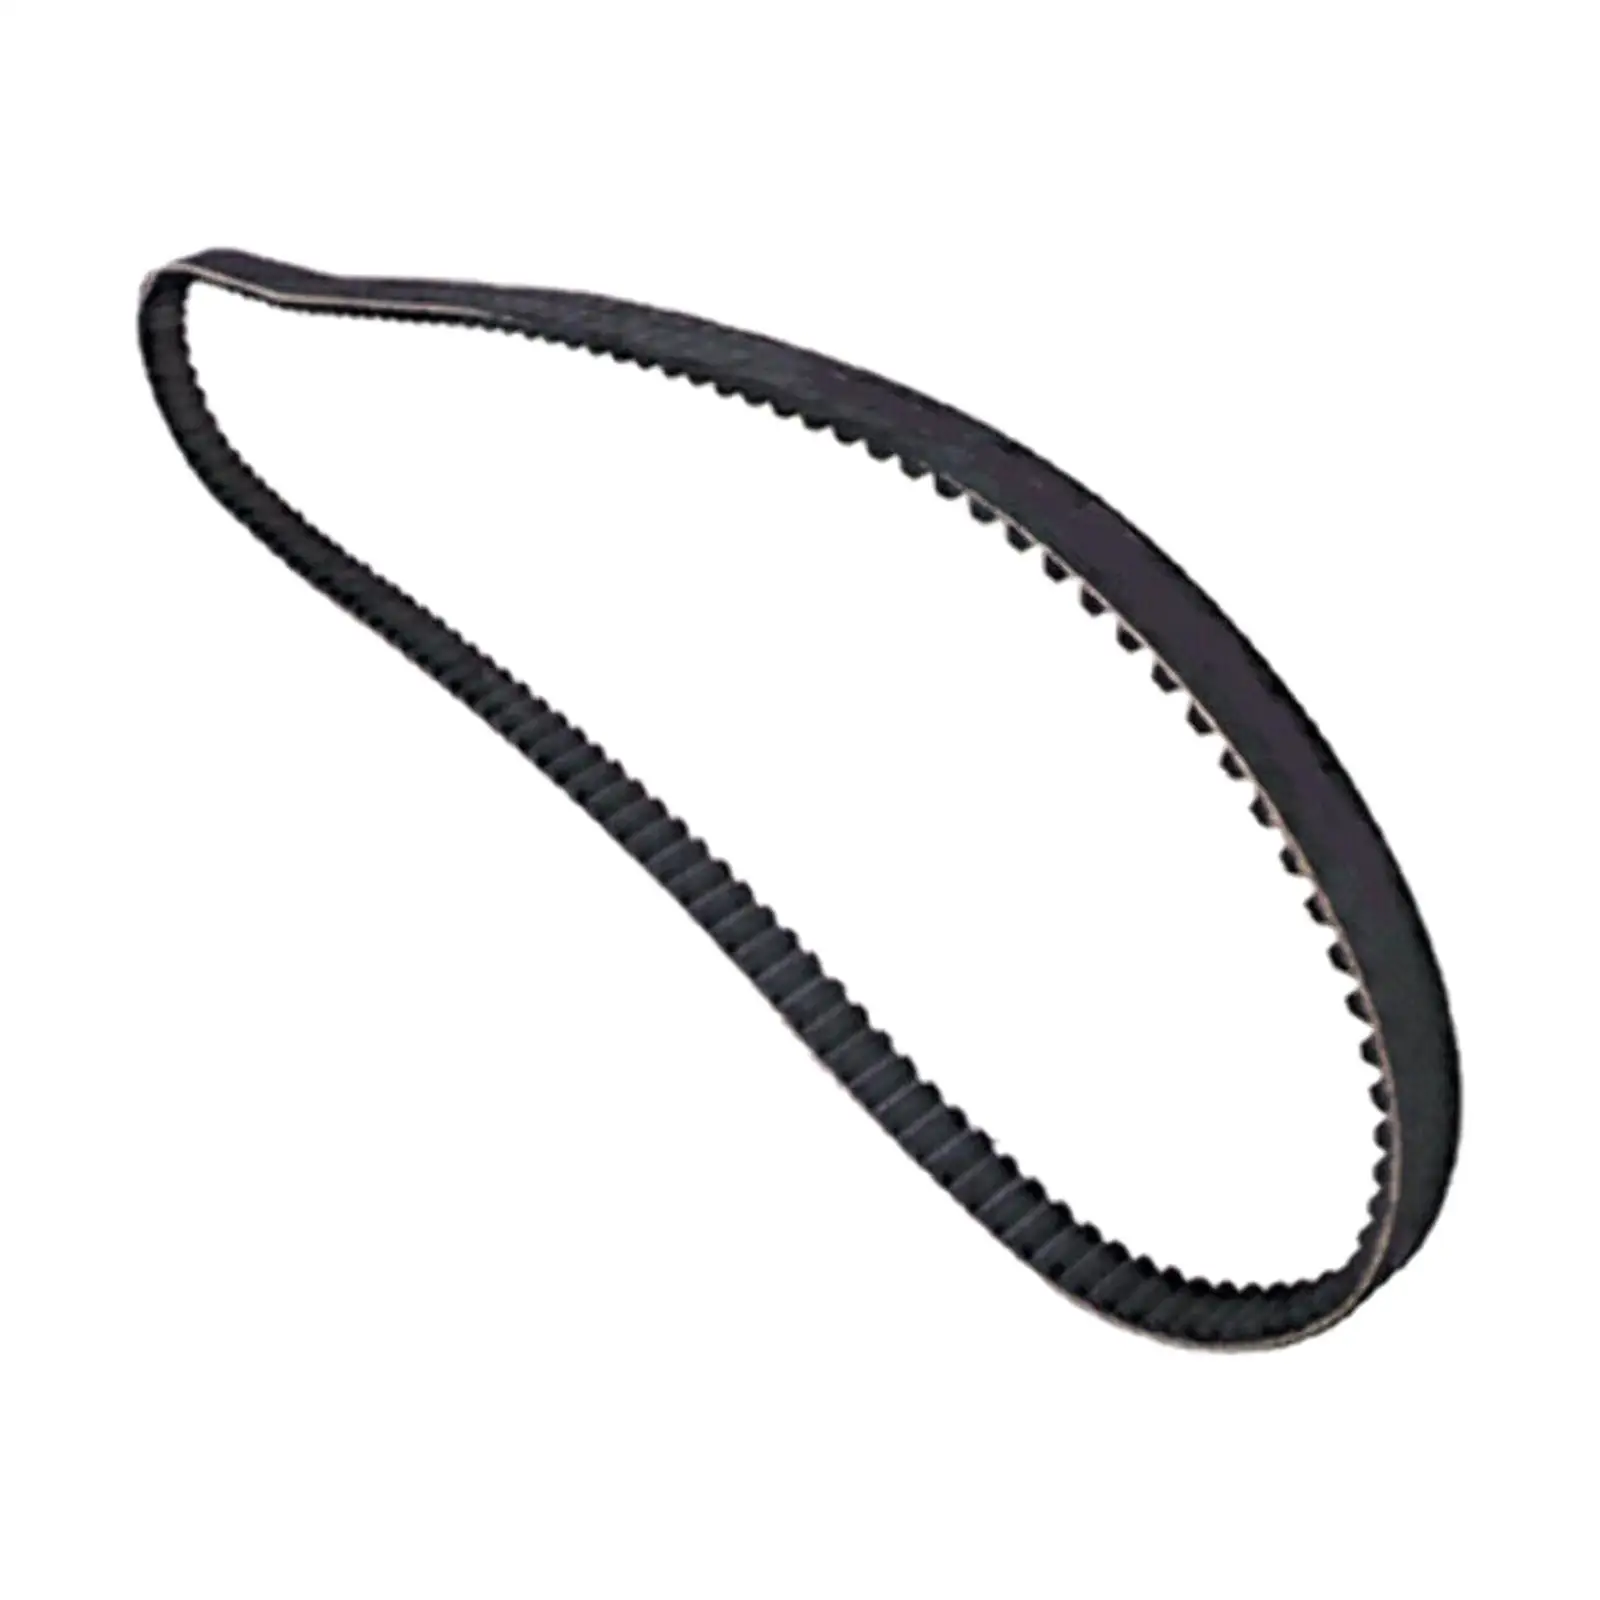 Rear Drive Belt 58-433 Motorcycle Accessories for Dyna Fxdxi Fxdwg